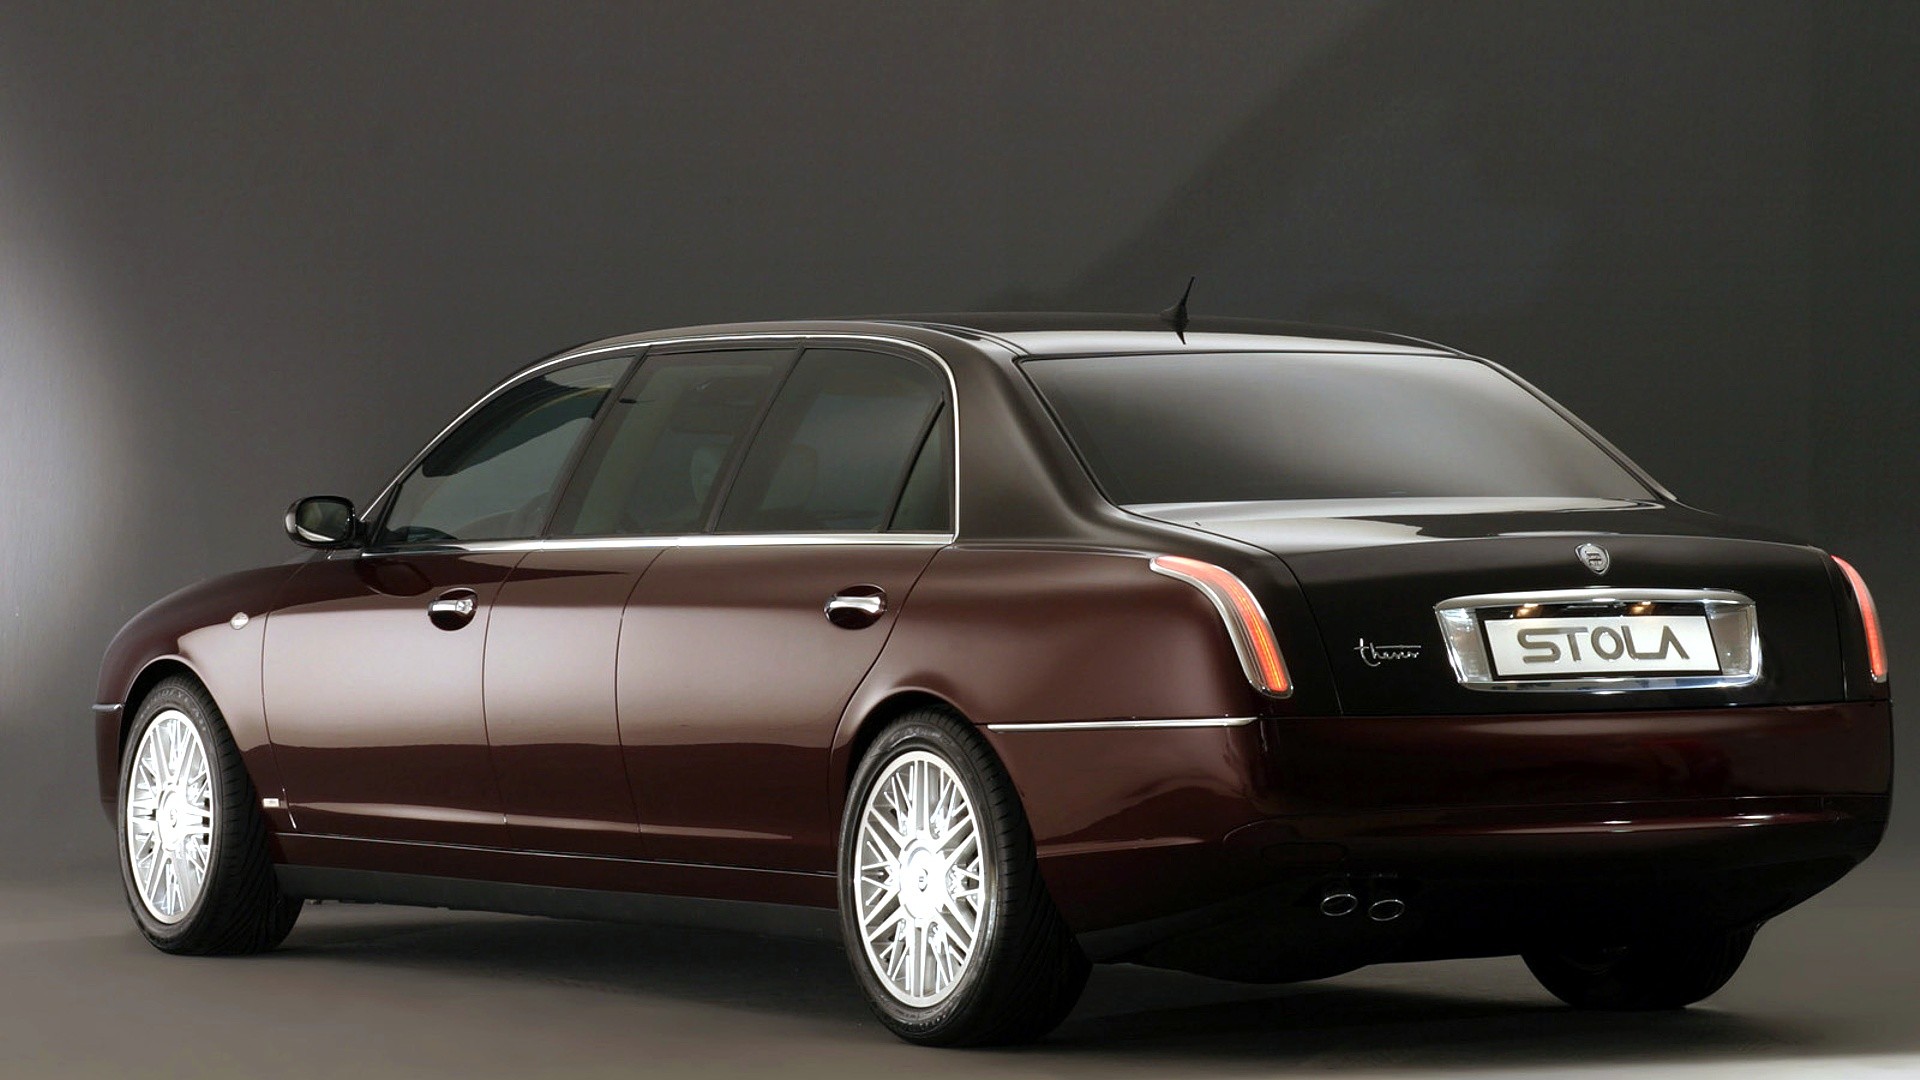 1920x1080 ... lancia thesis rear side hd wallpapers backgrounds ...